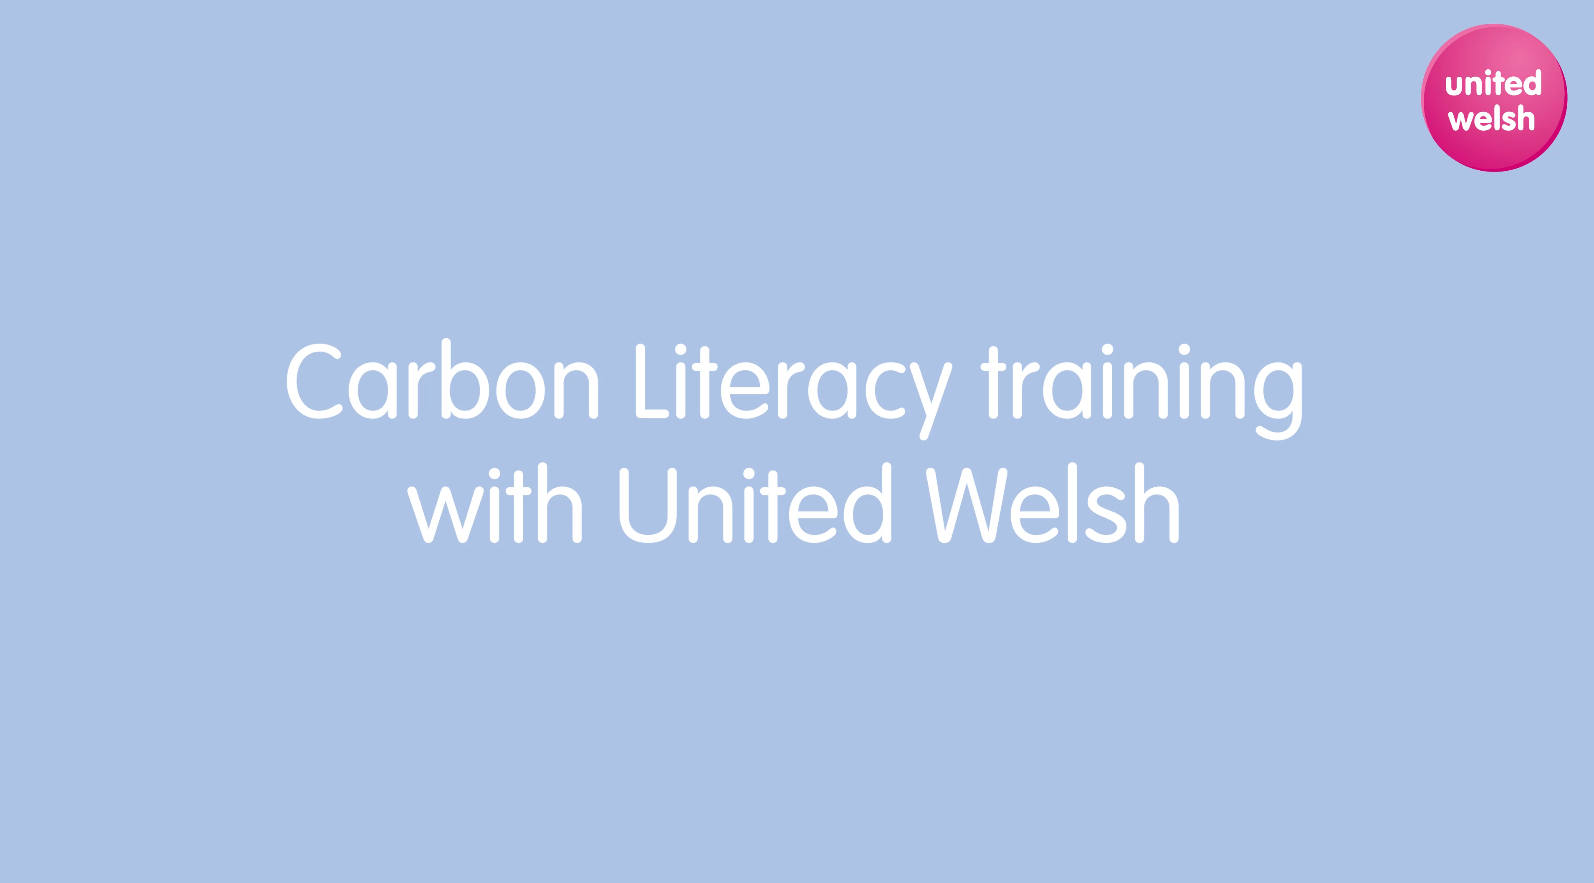 Carbon Literacy training with United Welsh